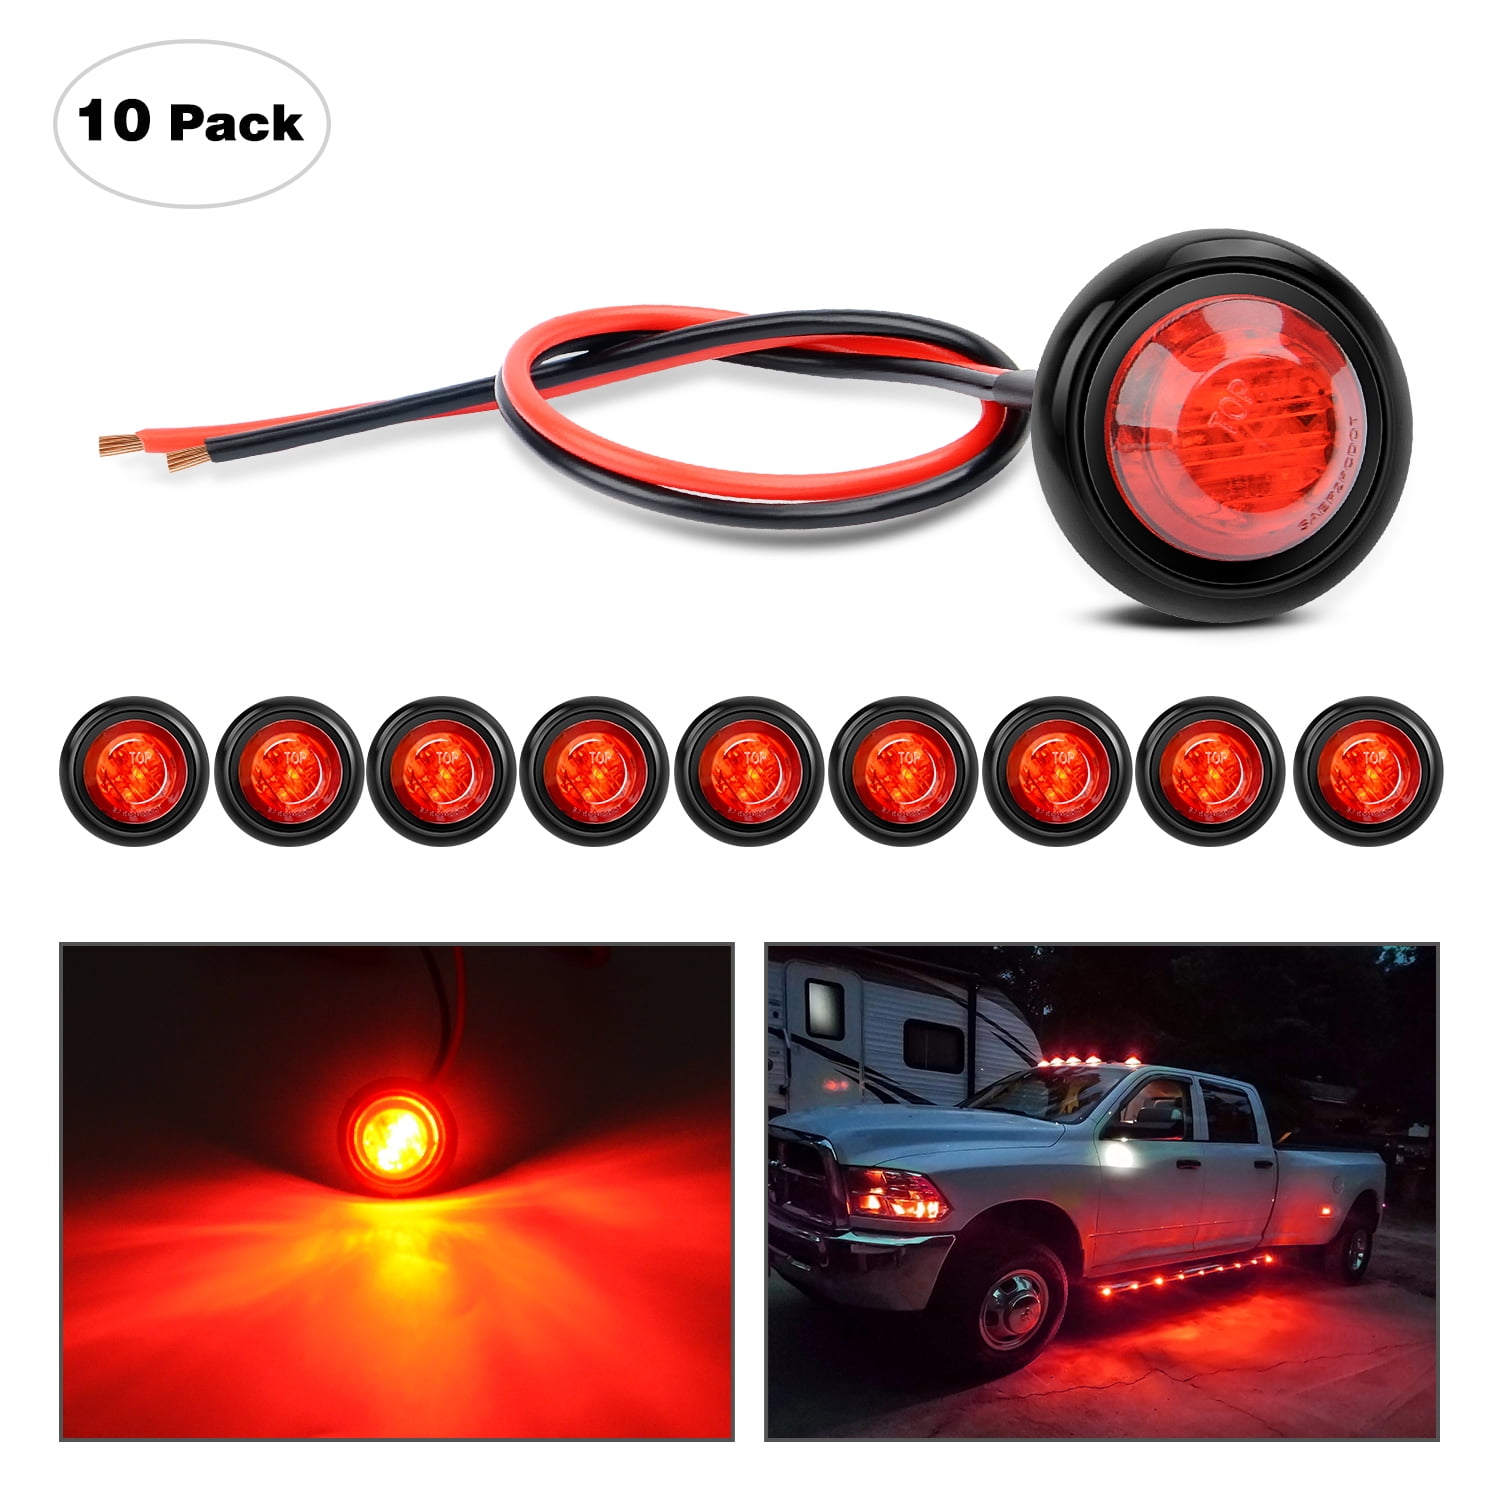 Red Hound Auto 20 Clear/Blue LED Side Marker Lights 3/4 Truck Trailer Pickup Extra Bright 